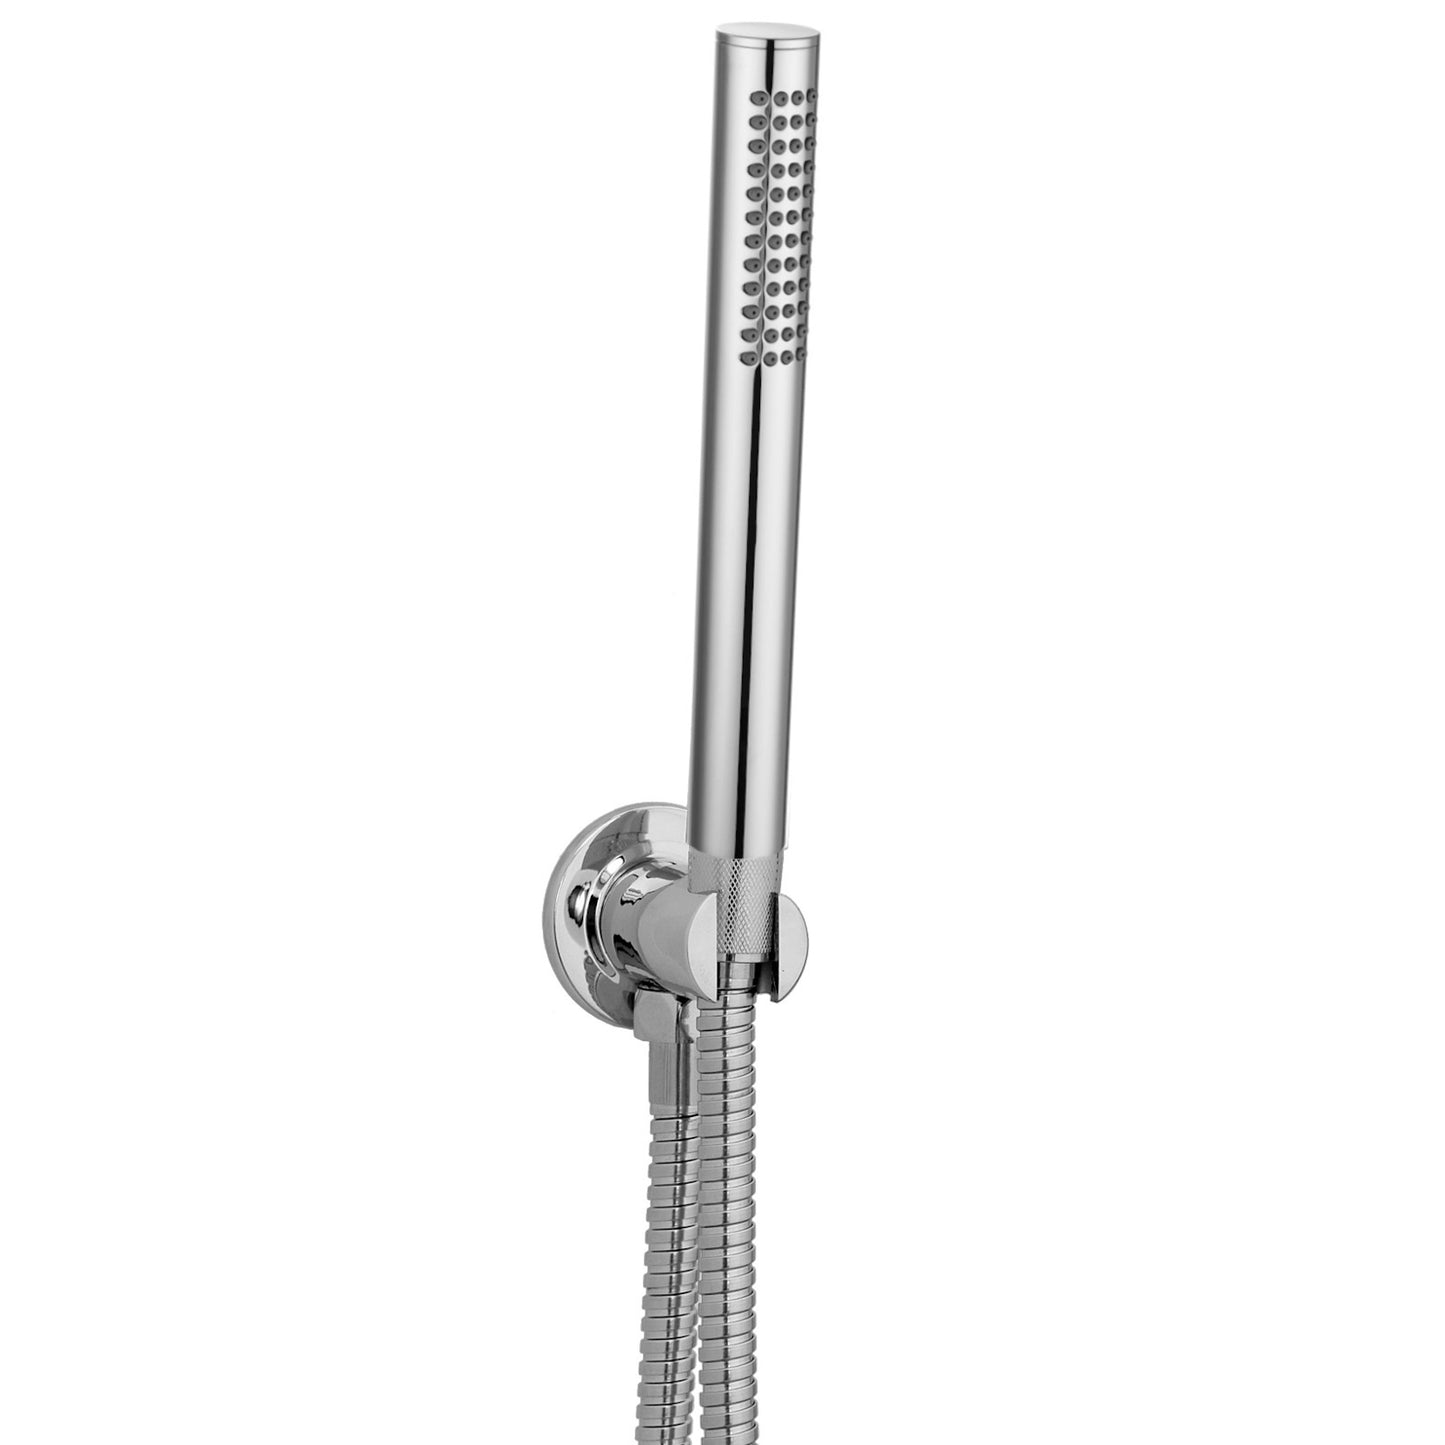 Venice Contemporary Round Concealed Thermostatic Shower Set Incl. Triple Valve, Wall Fixed 8" Shower Head, Handshower Kit - Chrome (2 Outlet)